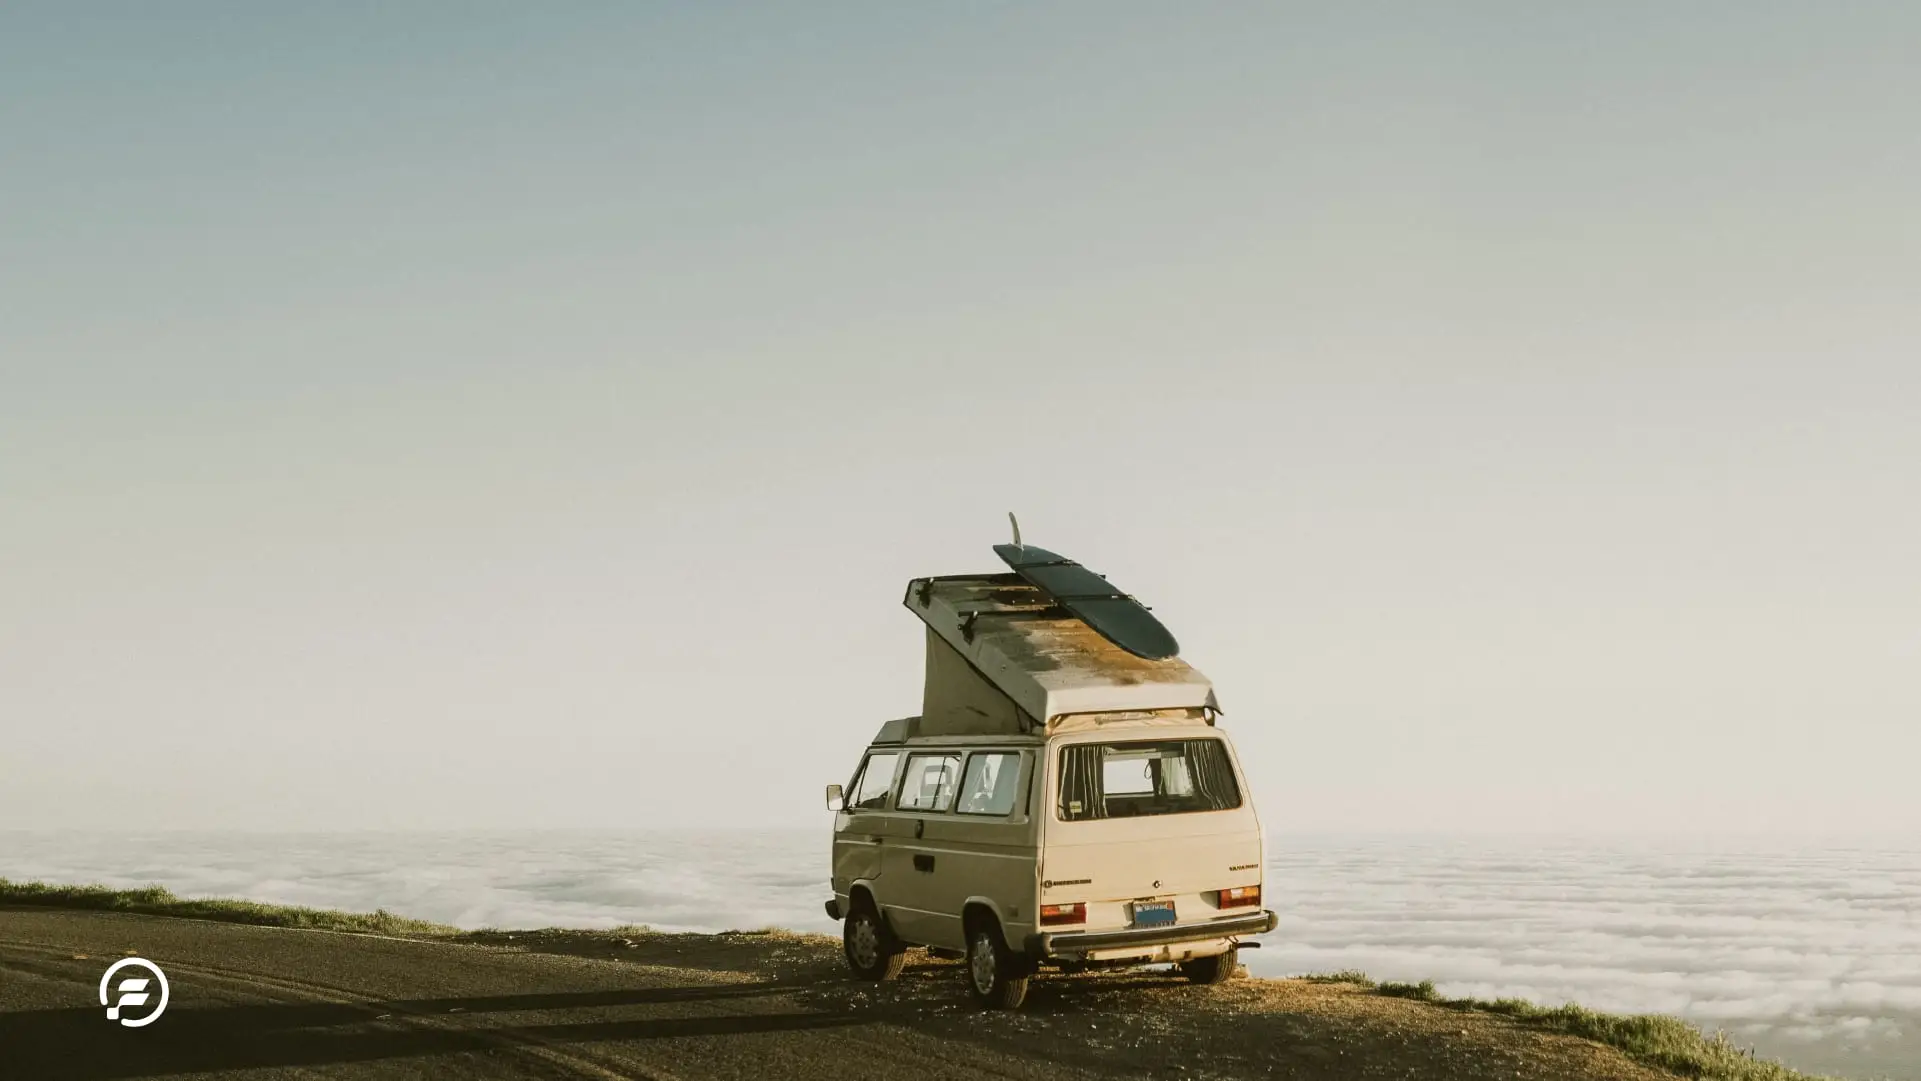 A van at the top of a cliff overlooking the ocean